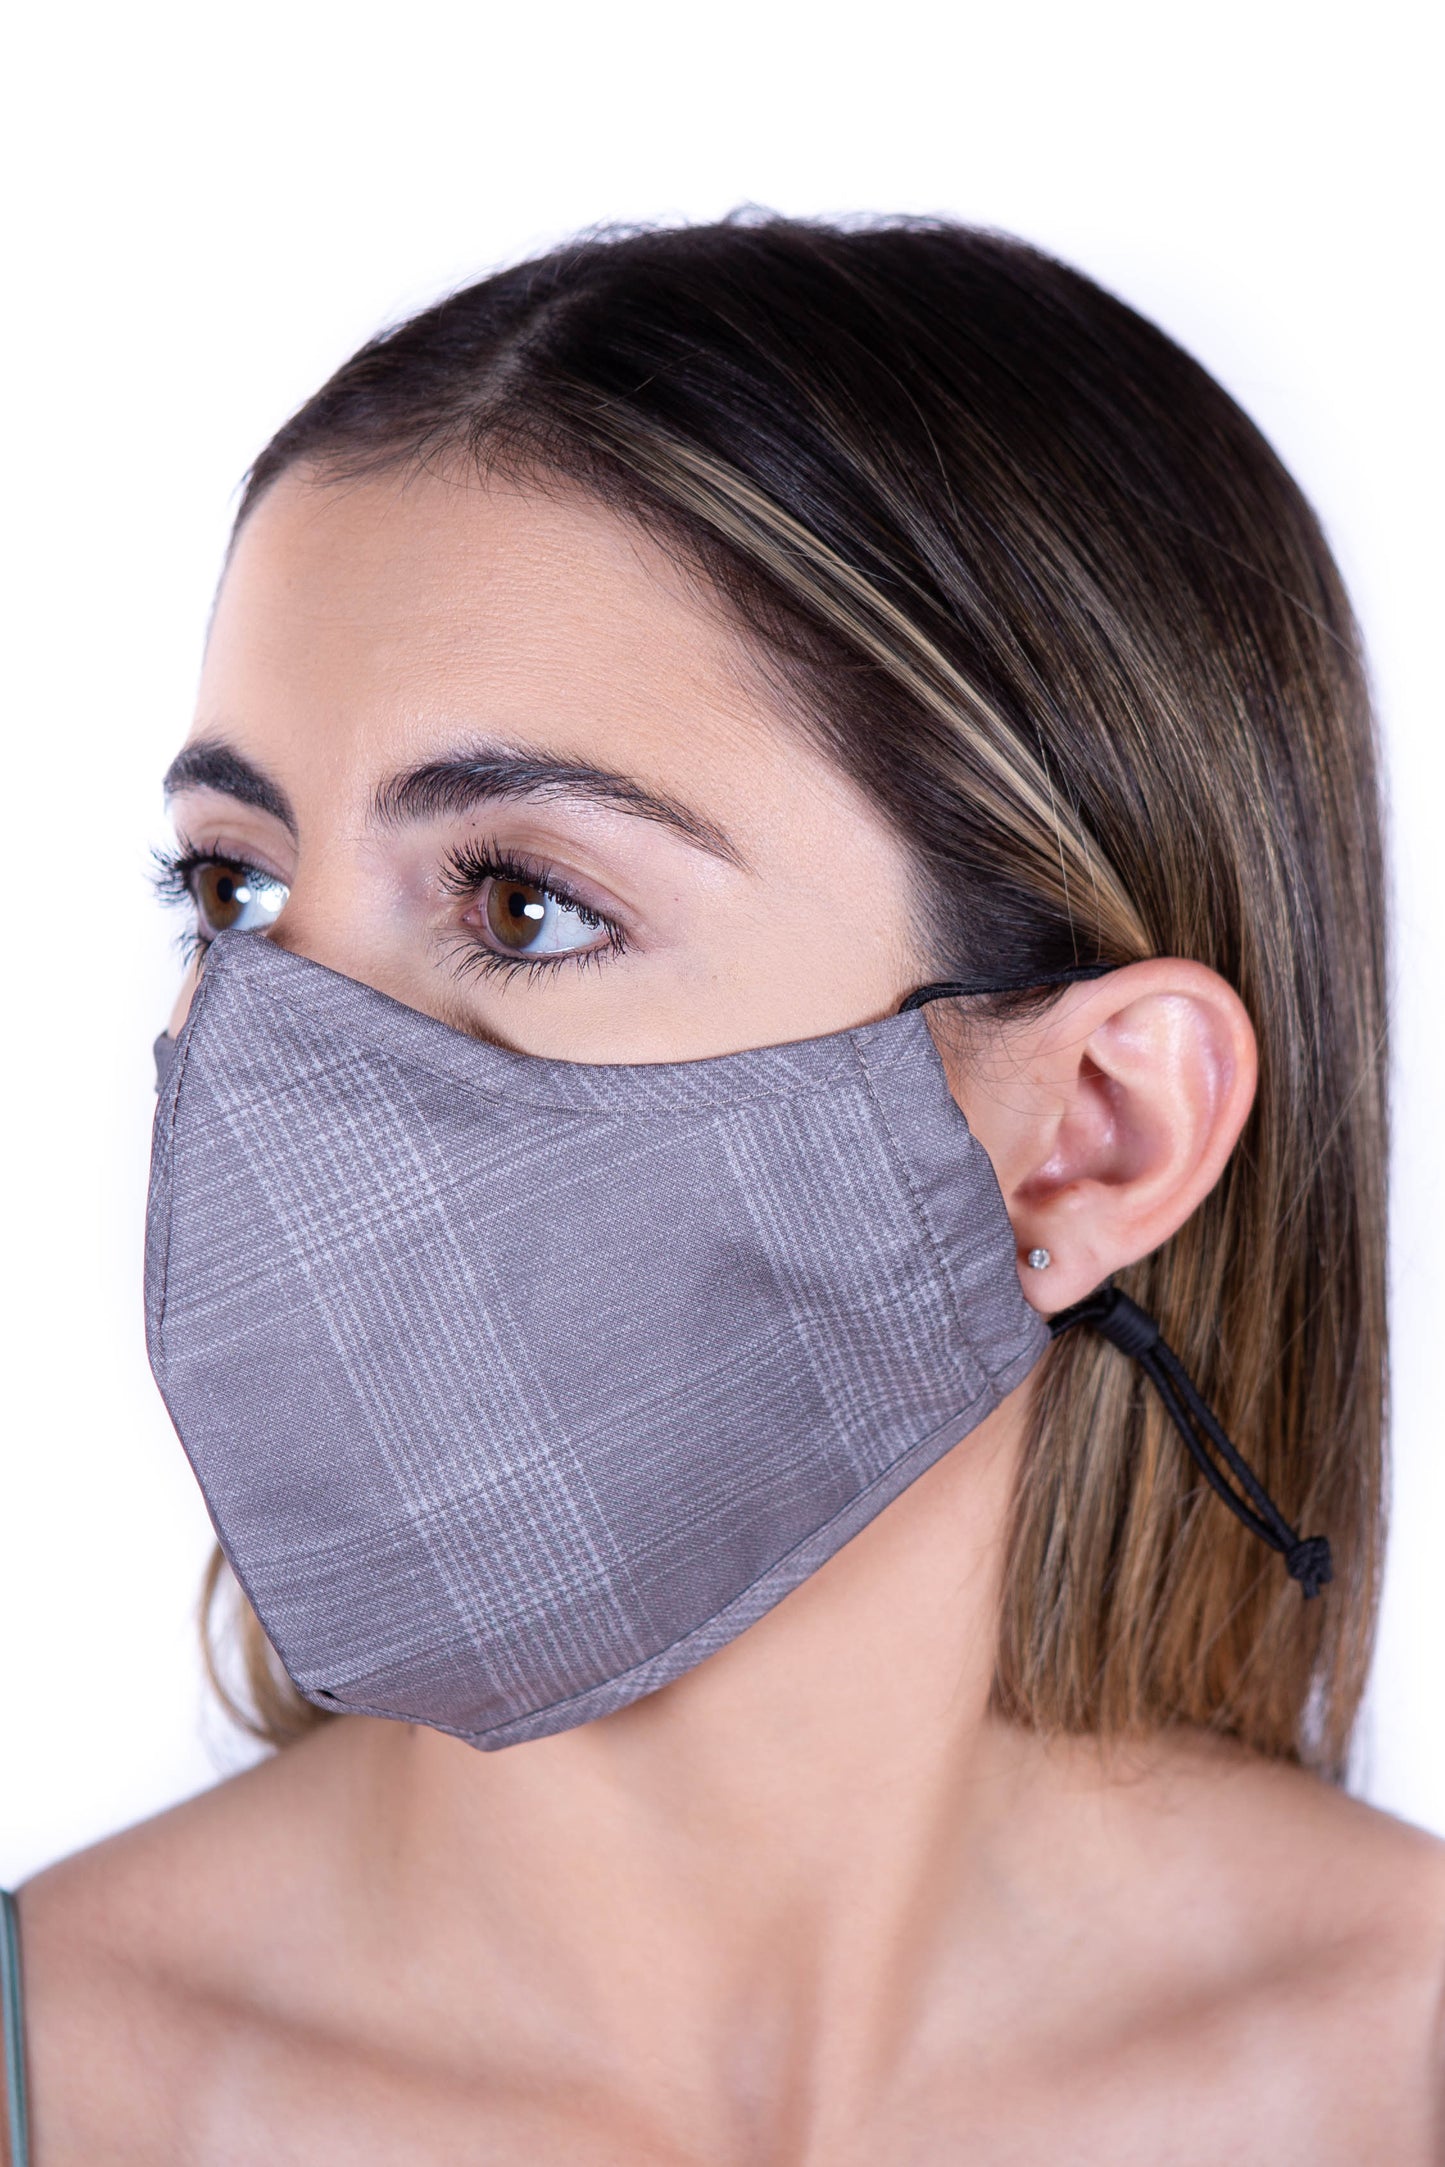 Low Profile 2 Layer Fabric Facemask: Nose Wire, Water Repellent, Washable & Breathable Face Mask w/Adjustable Sliders (8 Colors)